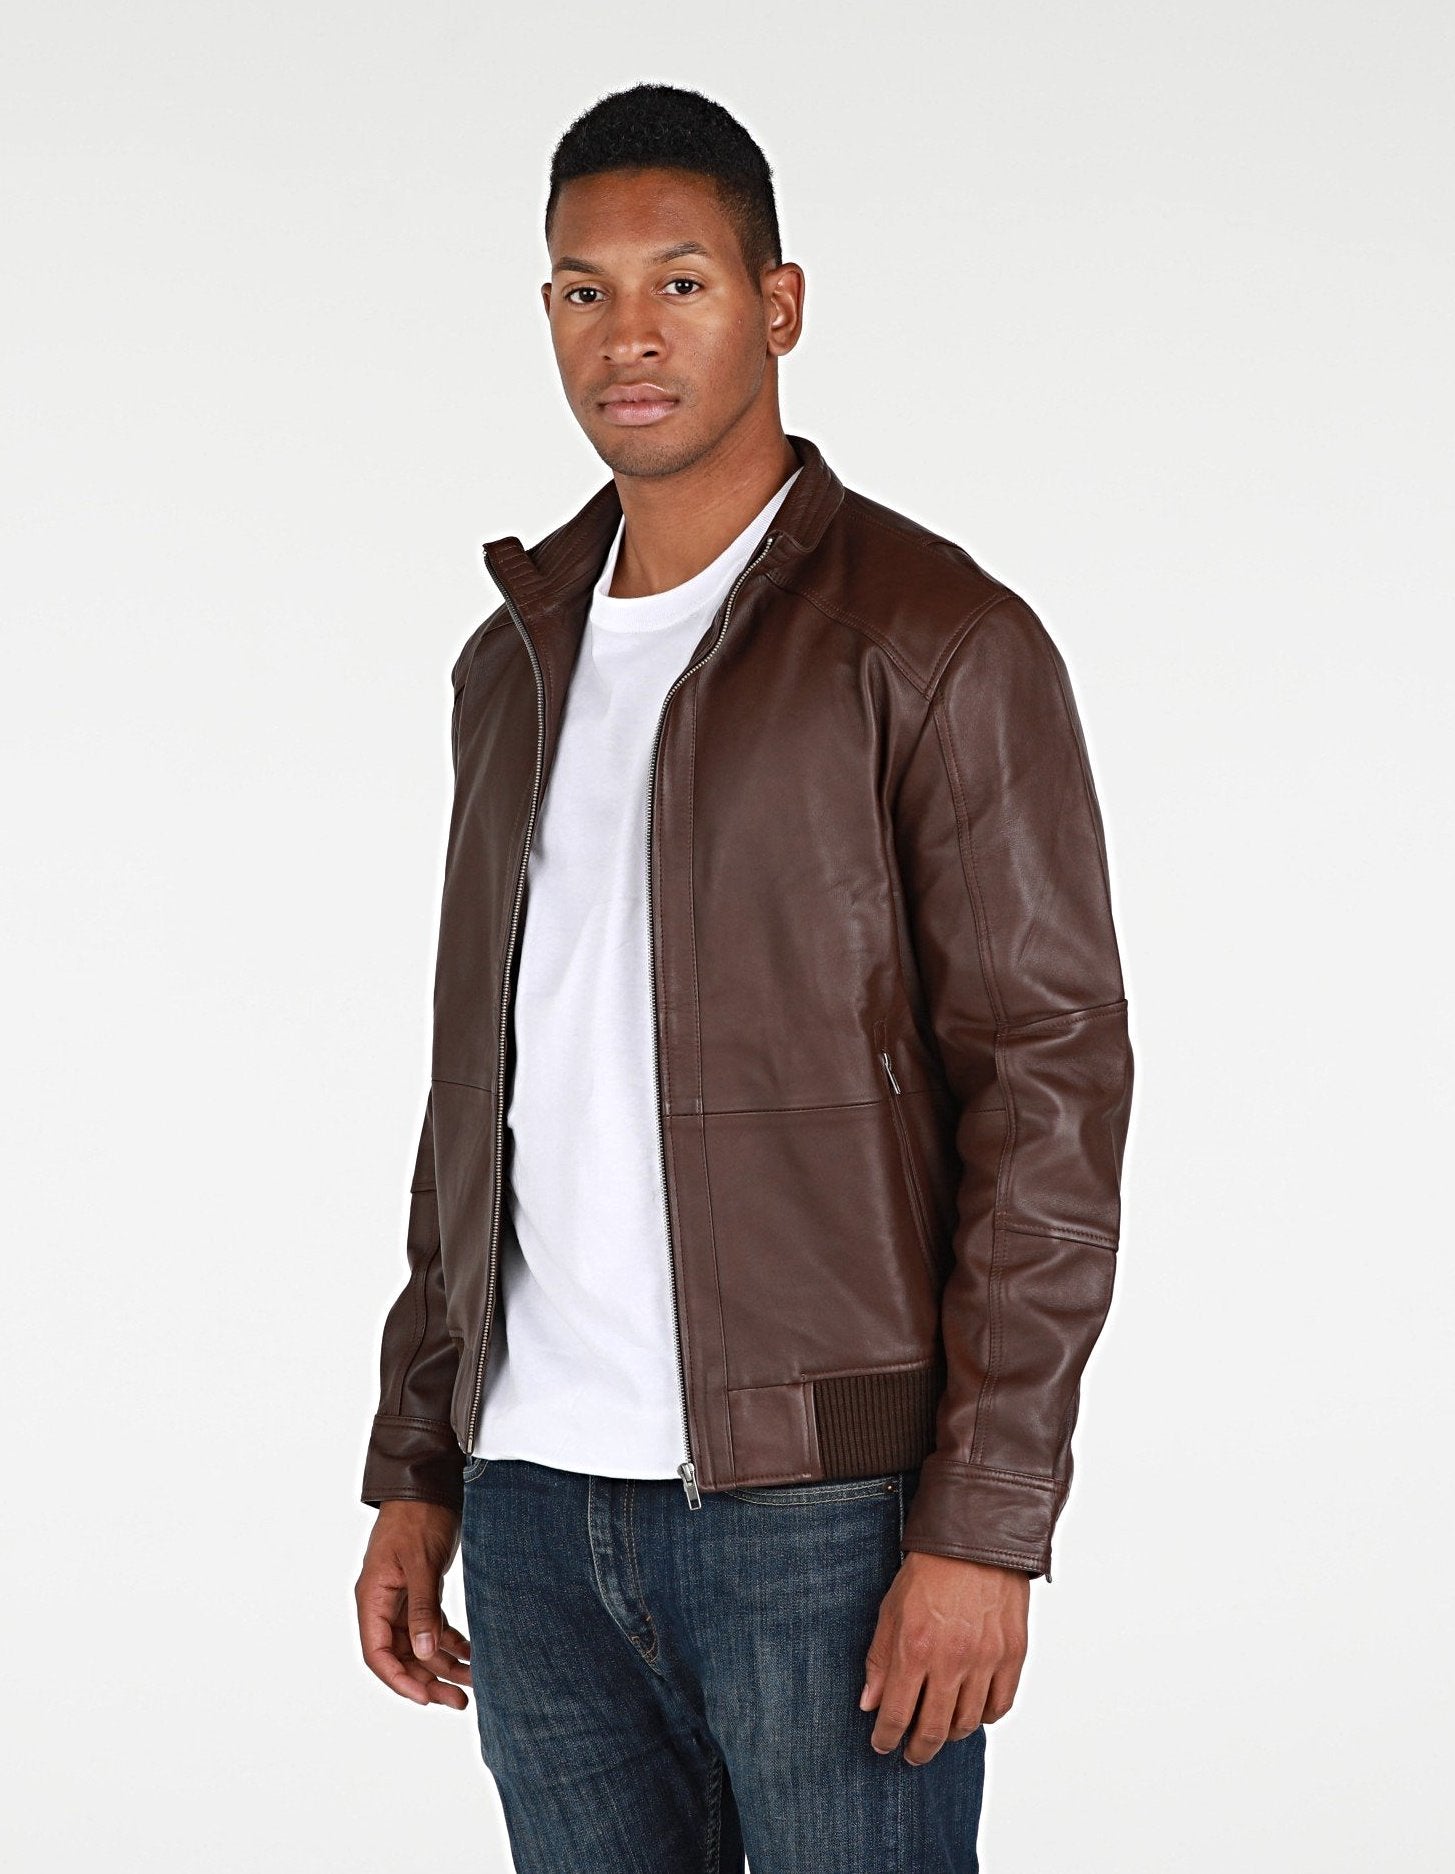 Picture of a Men's Genuine Leather Brown Bomber Jacket side view